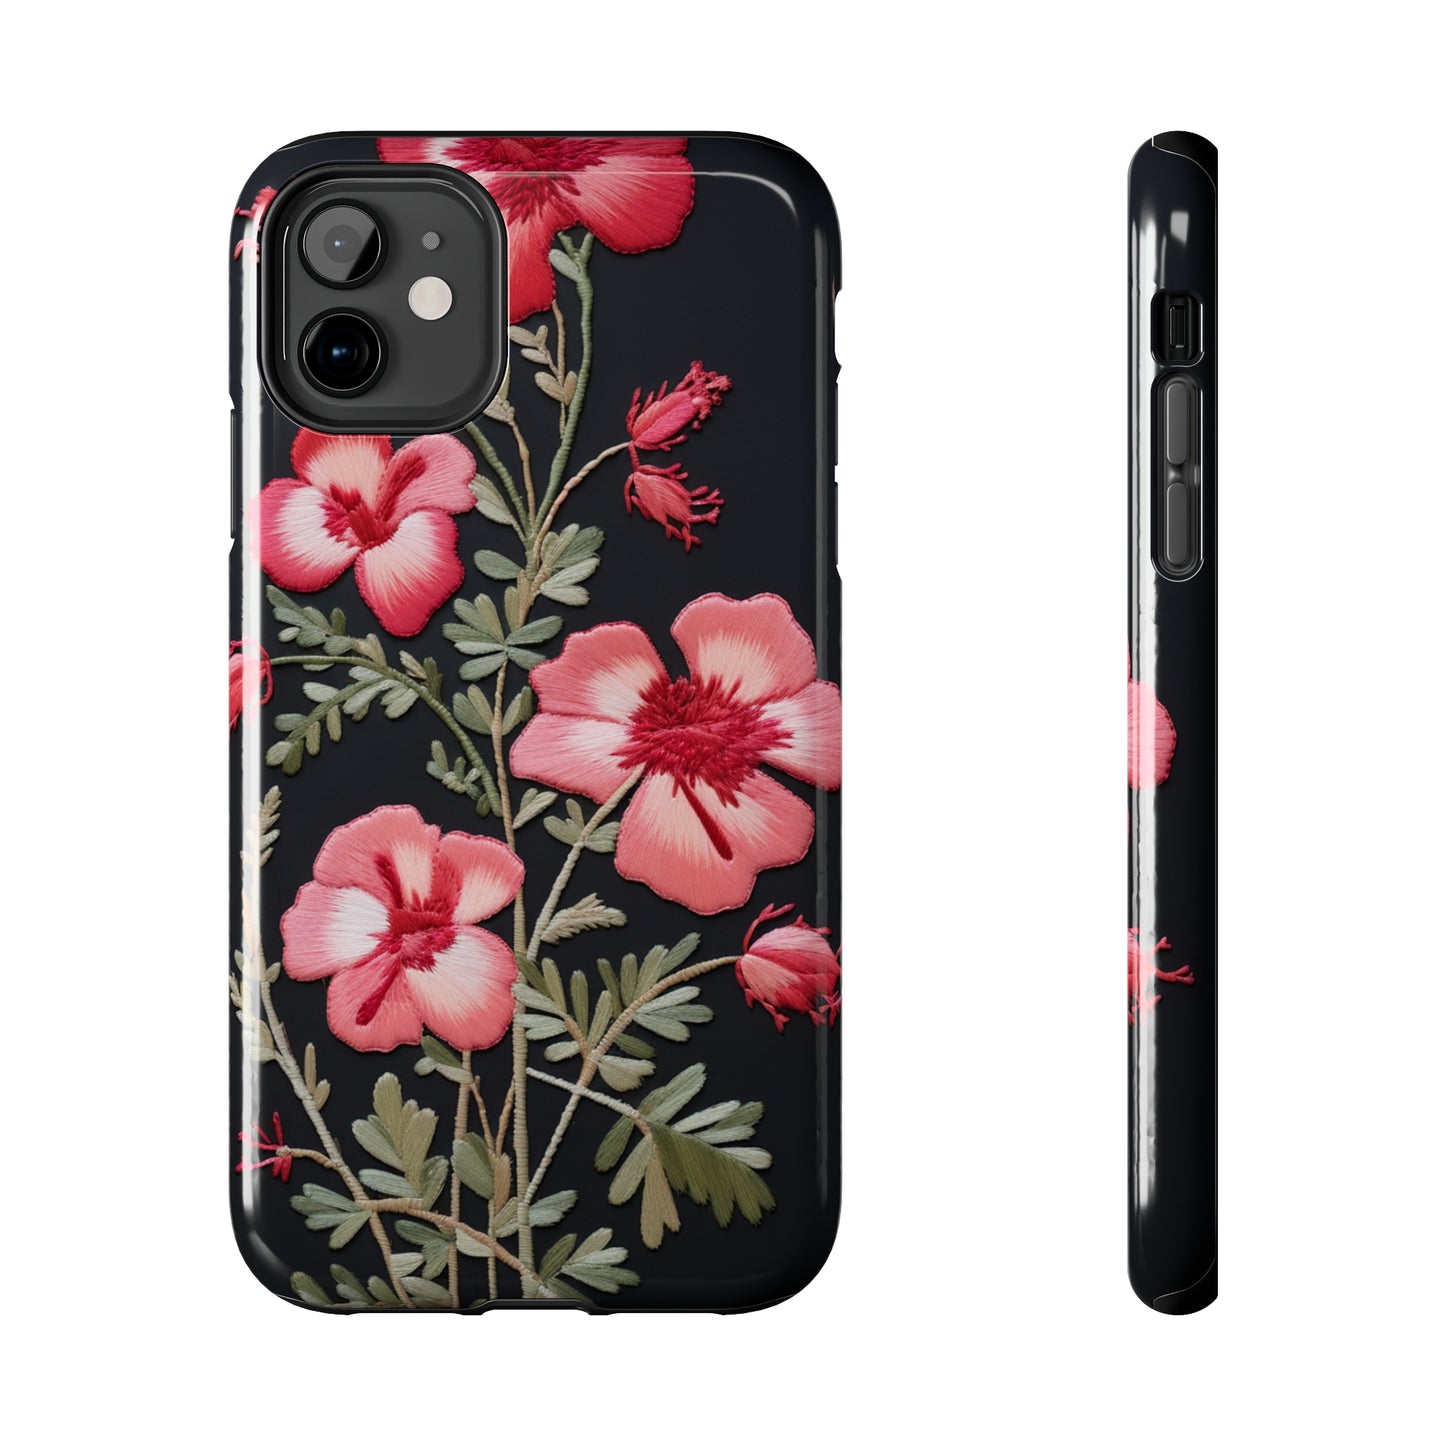 New Floral Embroidery iPhone Case | Embrace the Beauty of Intricate Stitching